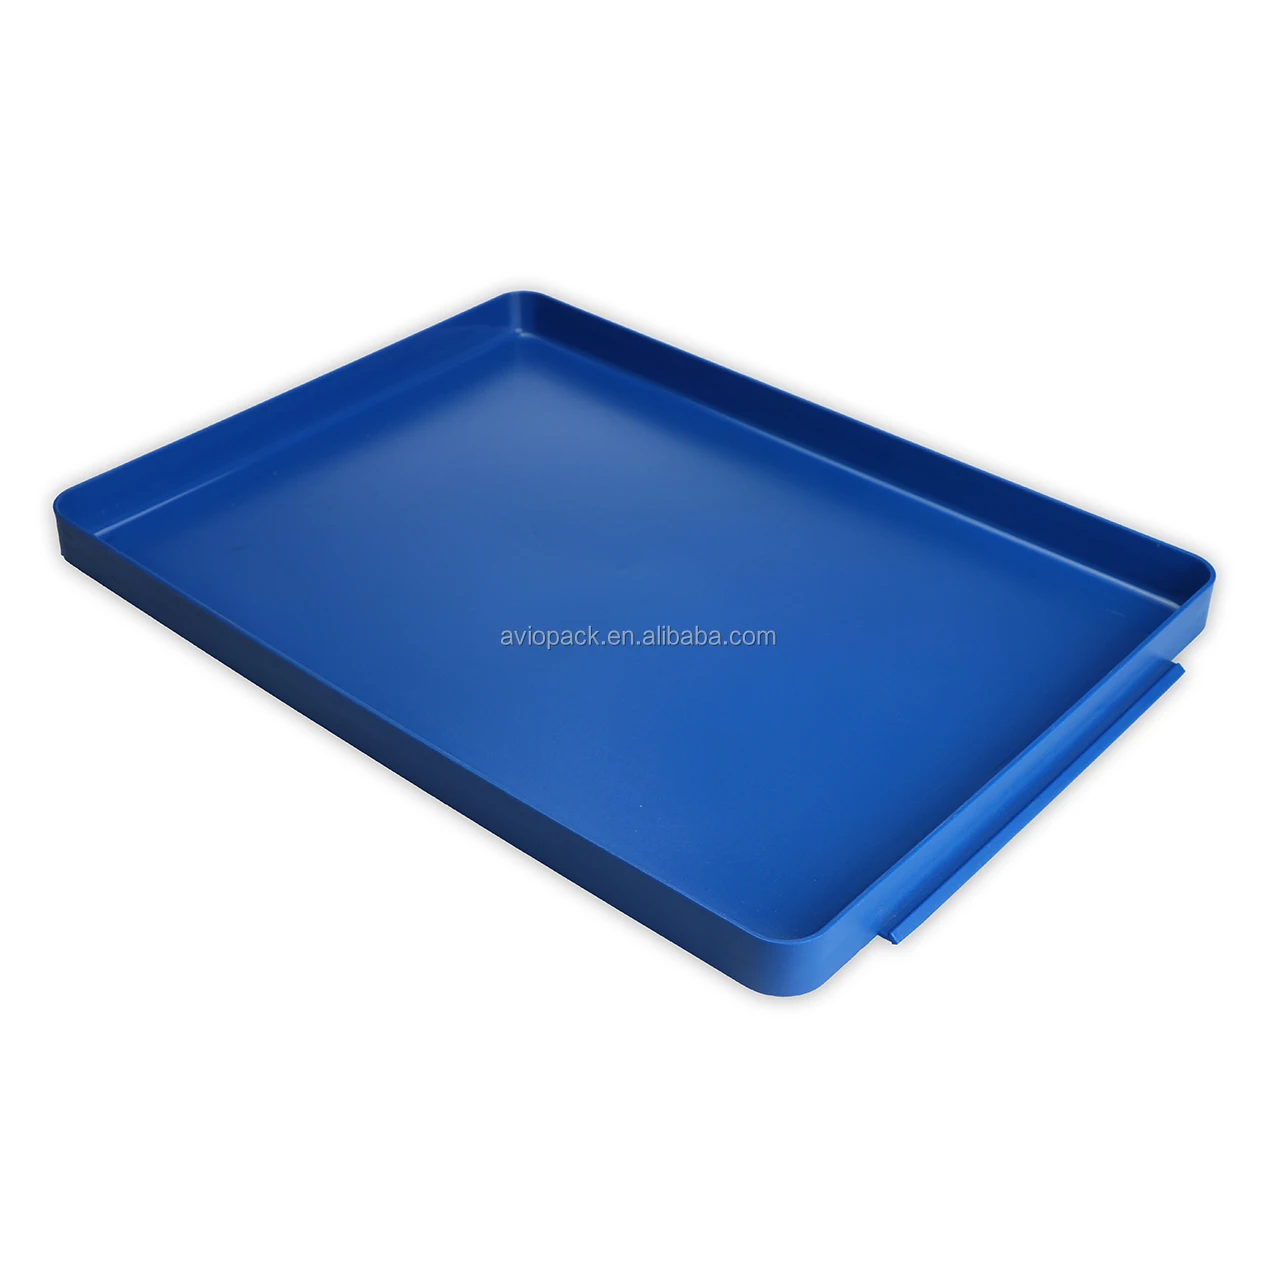 Best selling rectangular airline ABS plastic tray with handles